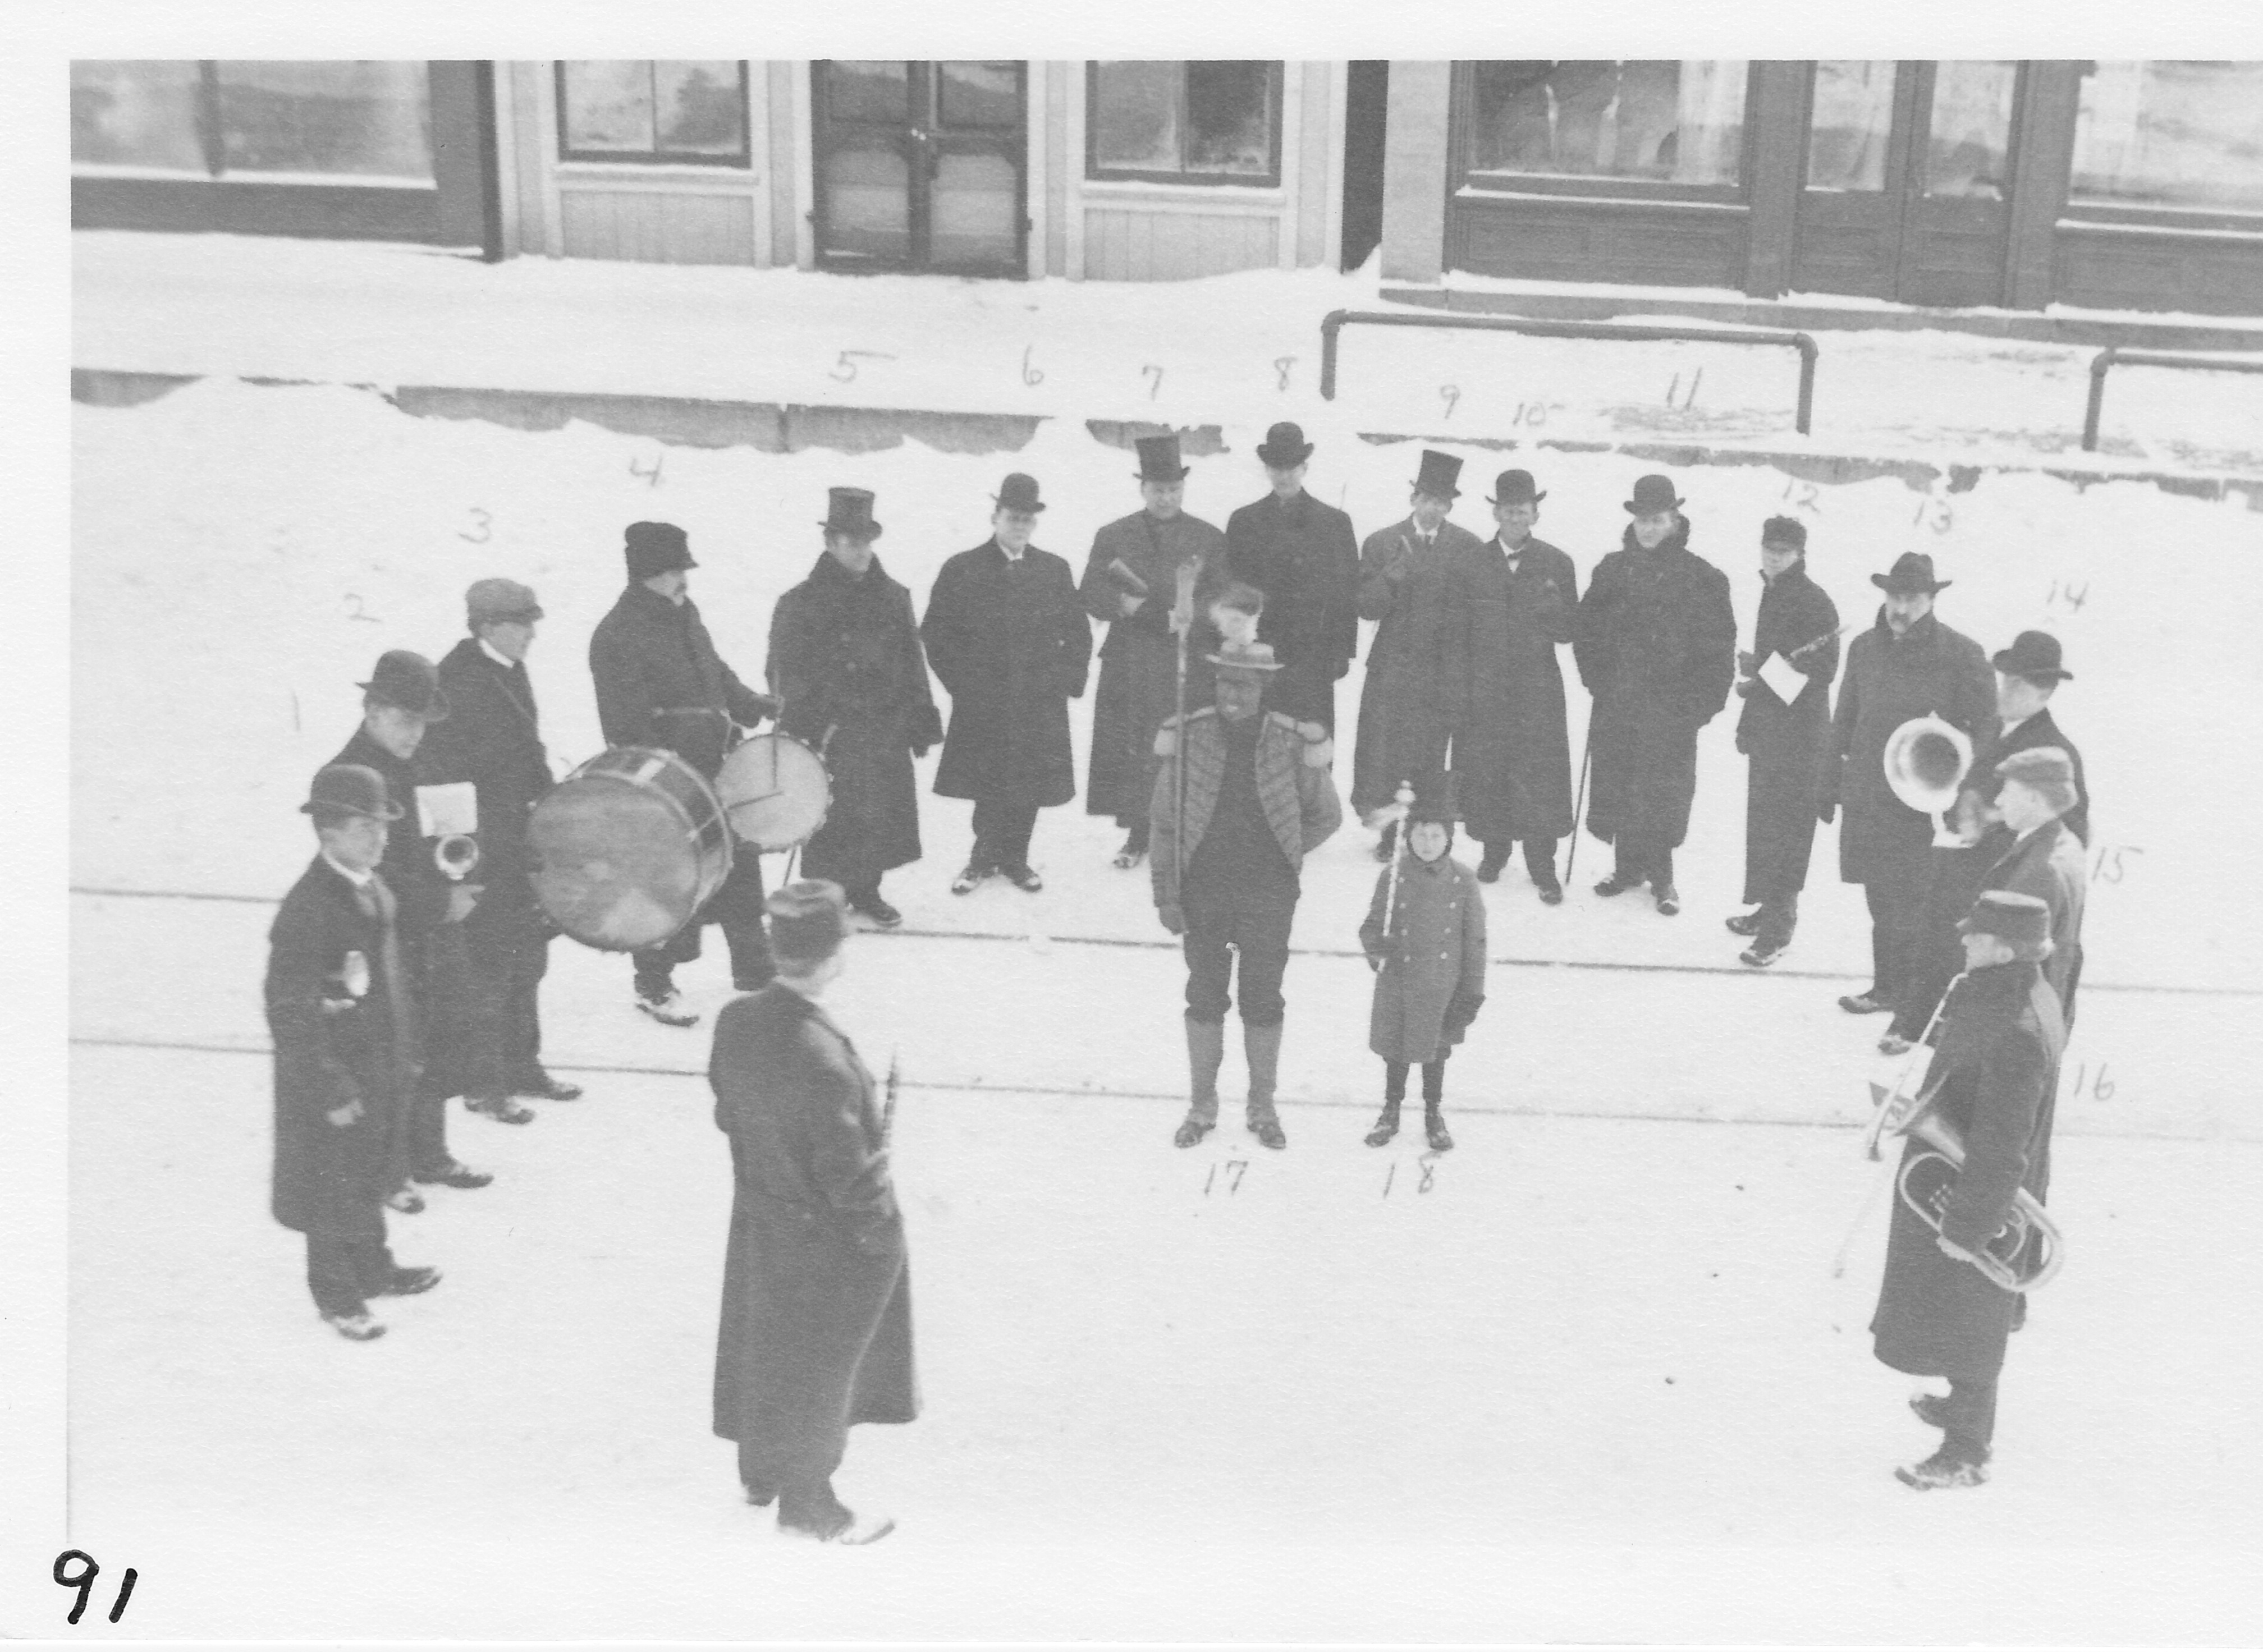 Morenci Band in 1901. South side of West Main St. in front of old Scofield Furniture Store.  Left to right: Harve Seigfried, Hervey Luke, Harry E. Allen, H. H. Spencer, Millard George, C. A. Wilson, Judge Burton Hart, ___________, Lou Reppert, Milton War, William Scofield, Frank Brower, Bert Beck, Bert Osgood, Clarence Brower, Luther Gay.  Center:  Charles Todd and Donald Crabbs (young boy).  Standing in front:  Jake Glime.